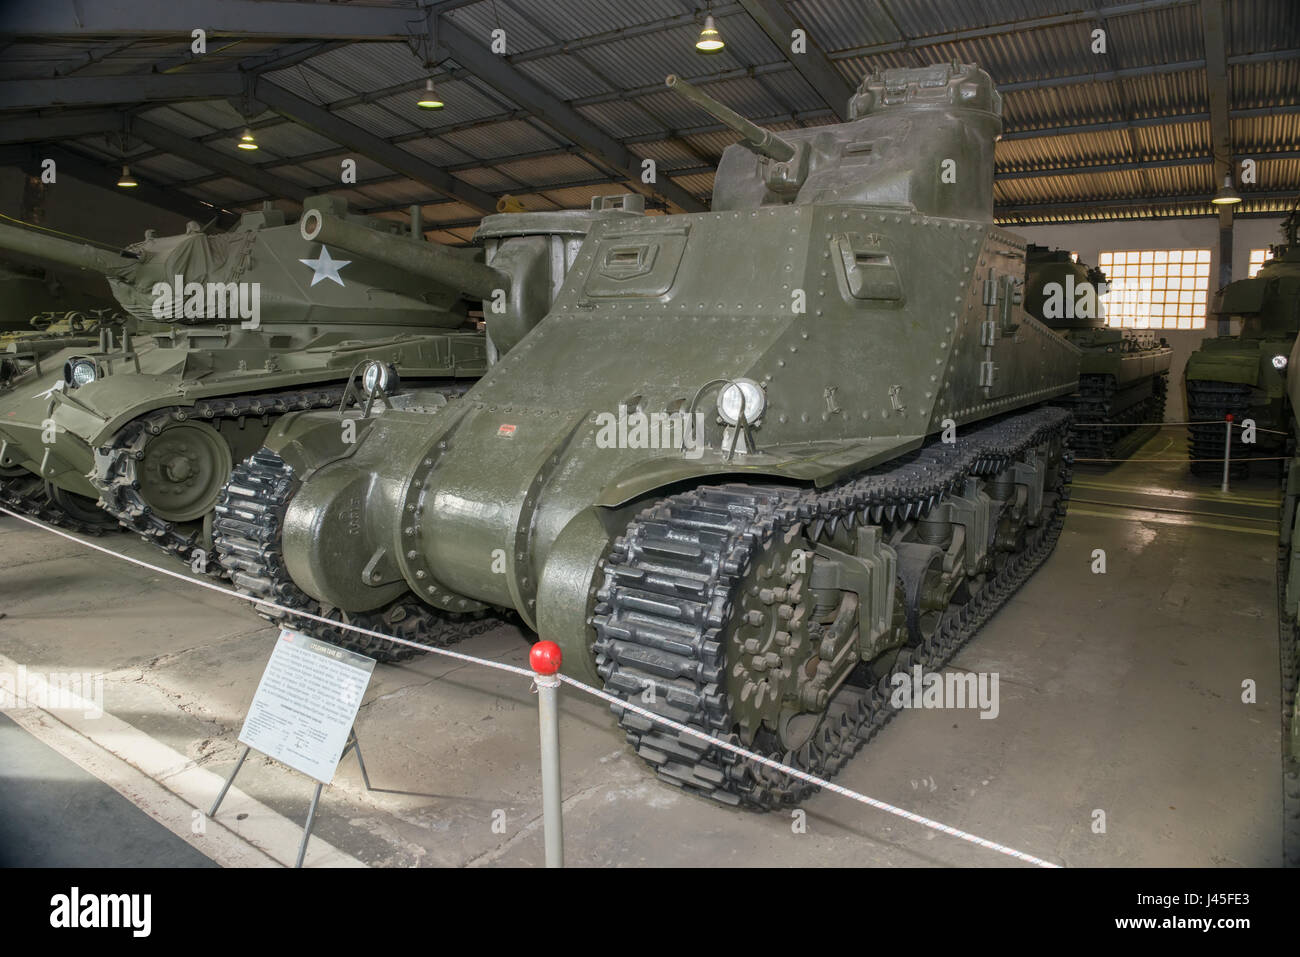 MOSCOW REGION, RUSSIA - SEPTEMBER 01, 2015: Medium Tank M3 US forces in the Museum of armored vehicles, Kubinka near the Moscow Stock Photo